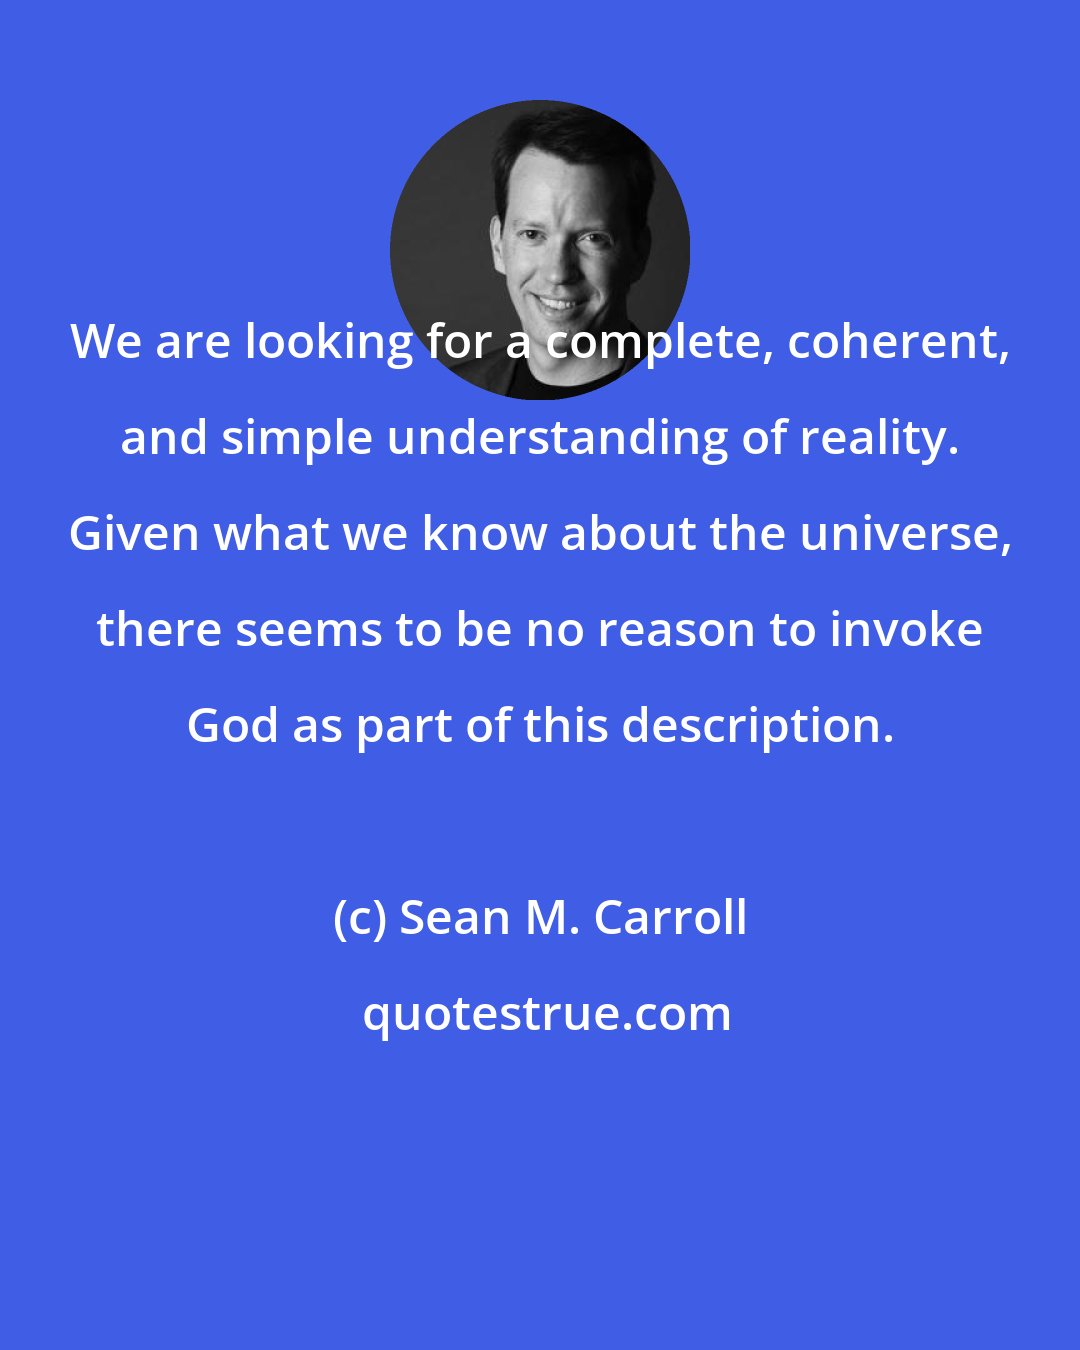 Sean M. Carroll: We are looking for a complete, coherent, and simple understanding of reality. Given what we know about the universe, there seems to be no reason to invoke God as part of this description.